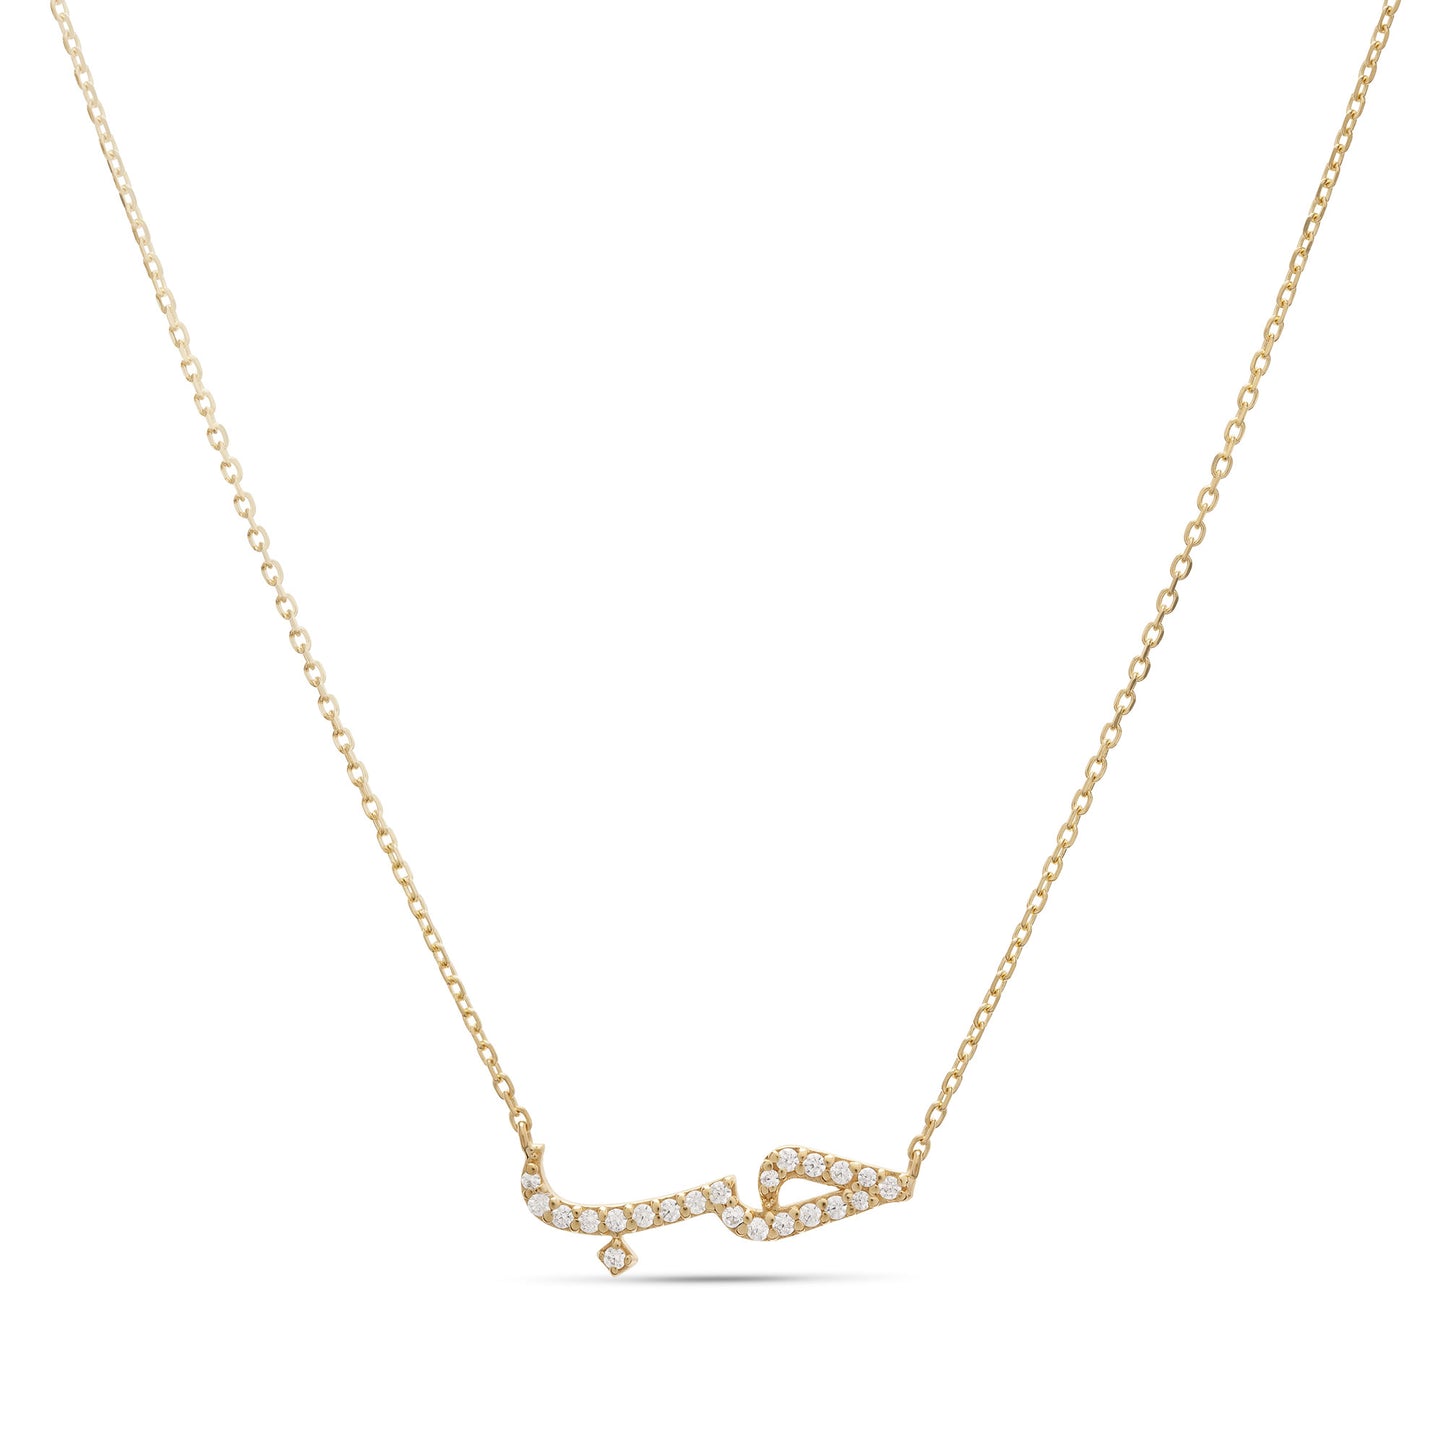 Hob (Love) Necklace